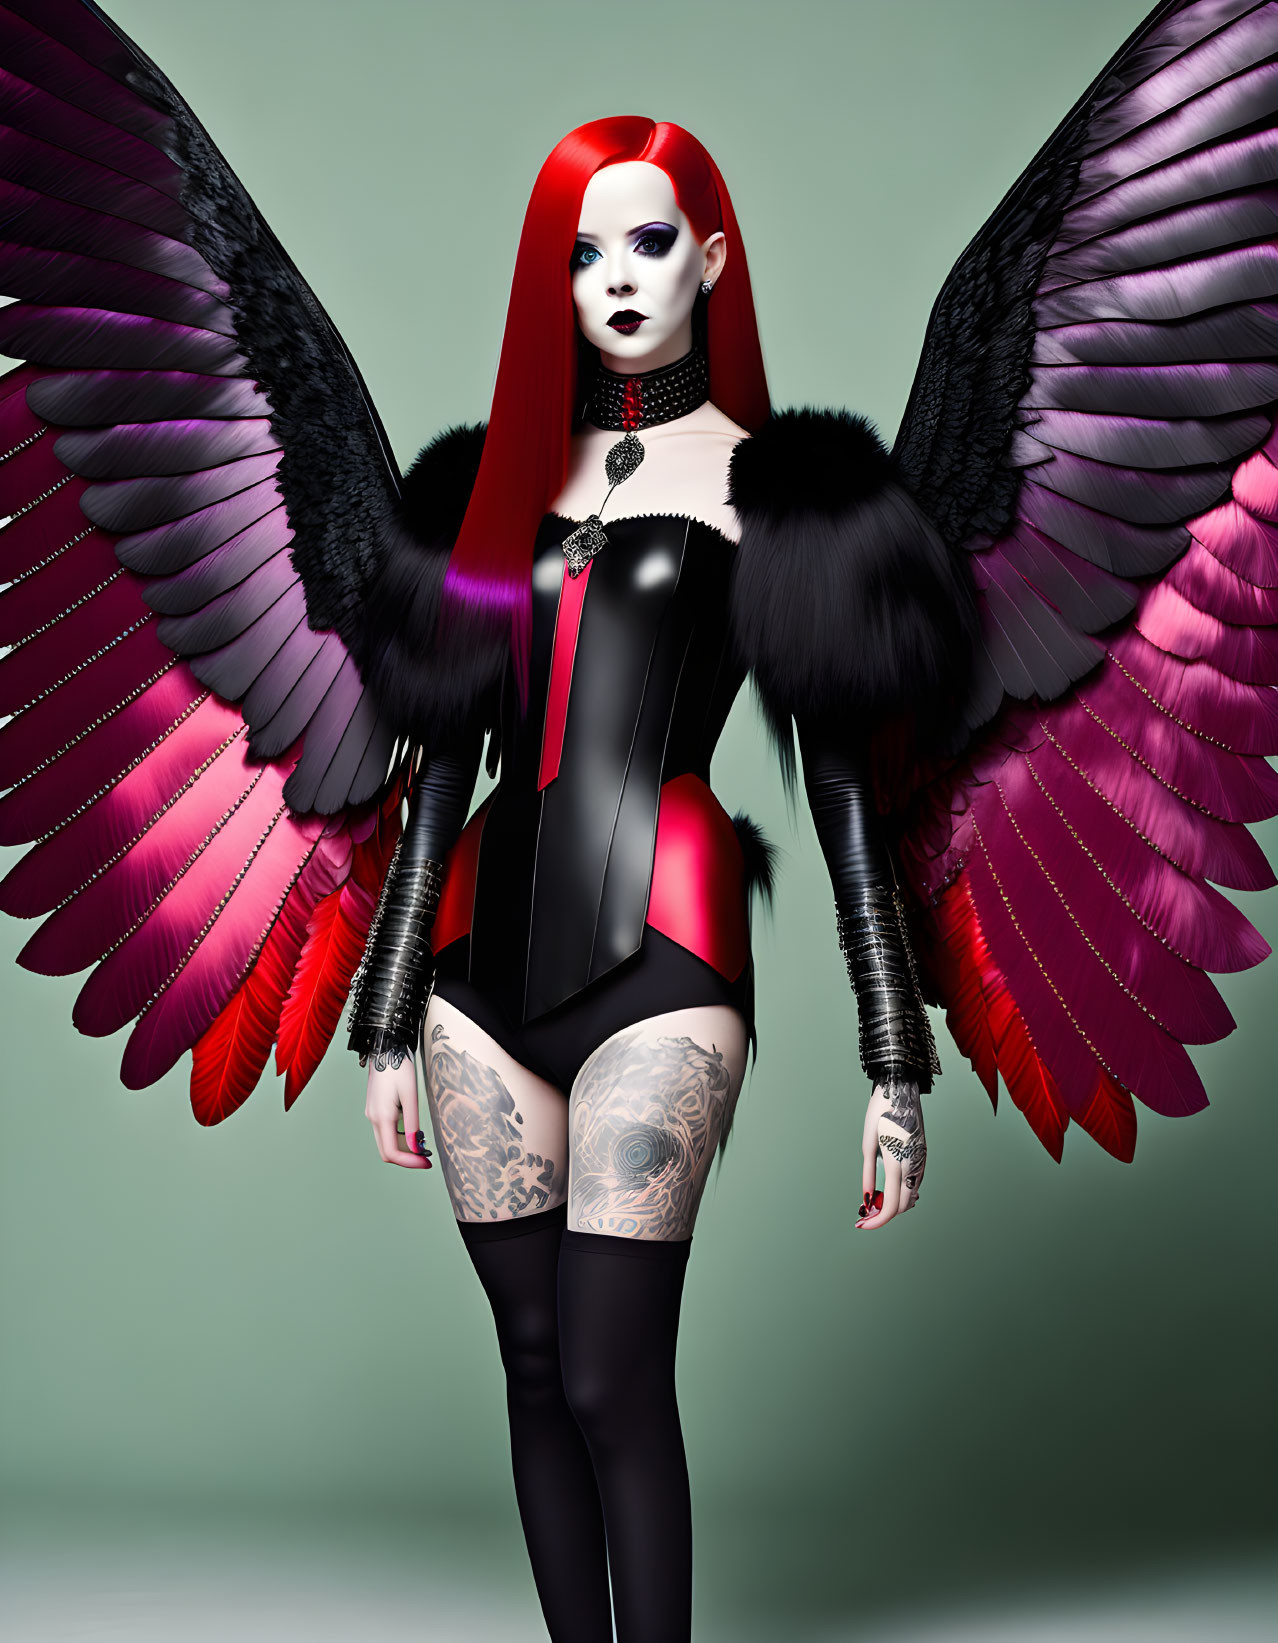 Stylized image: Woman with red hair, black and pink wings, tattoos, dark makeup on